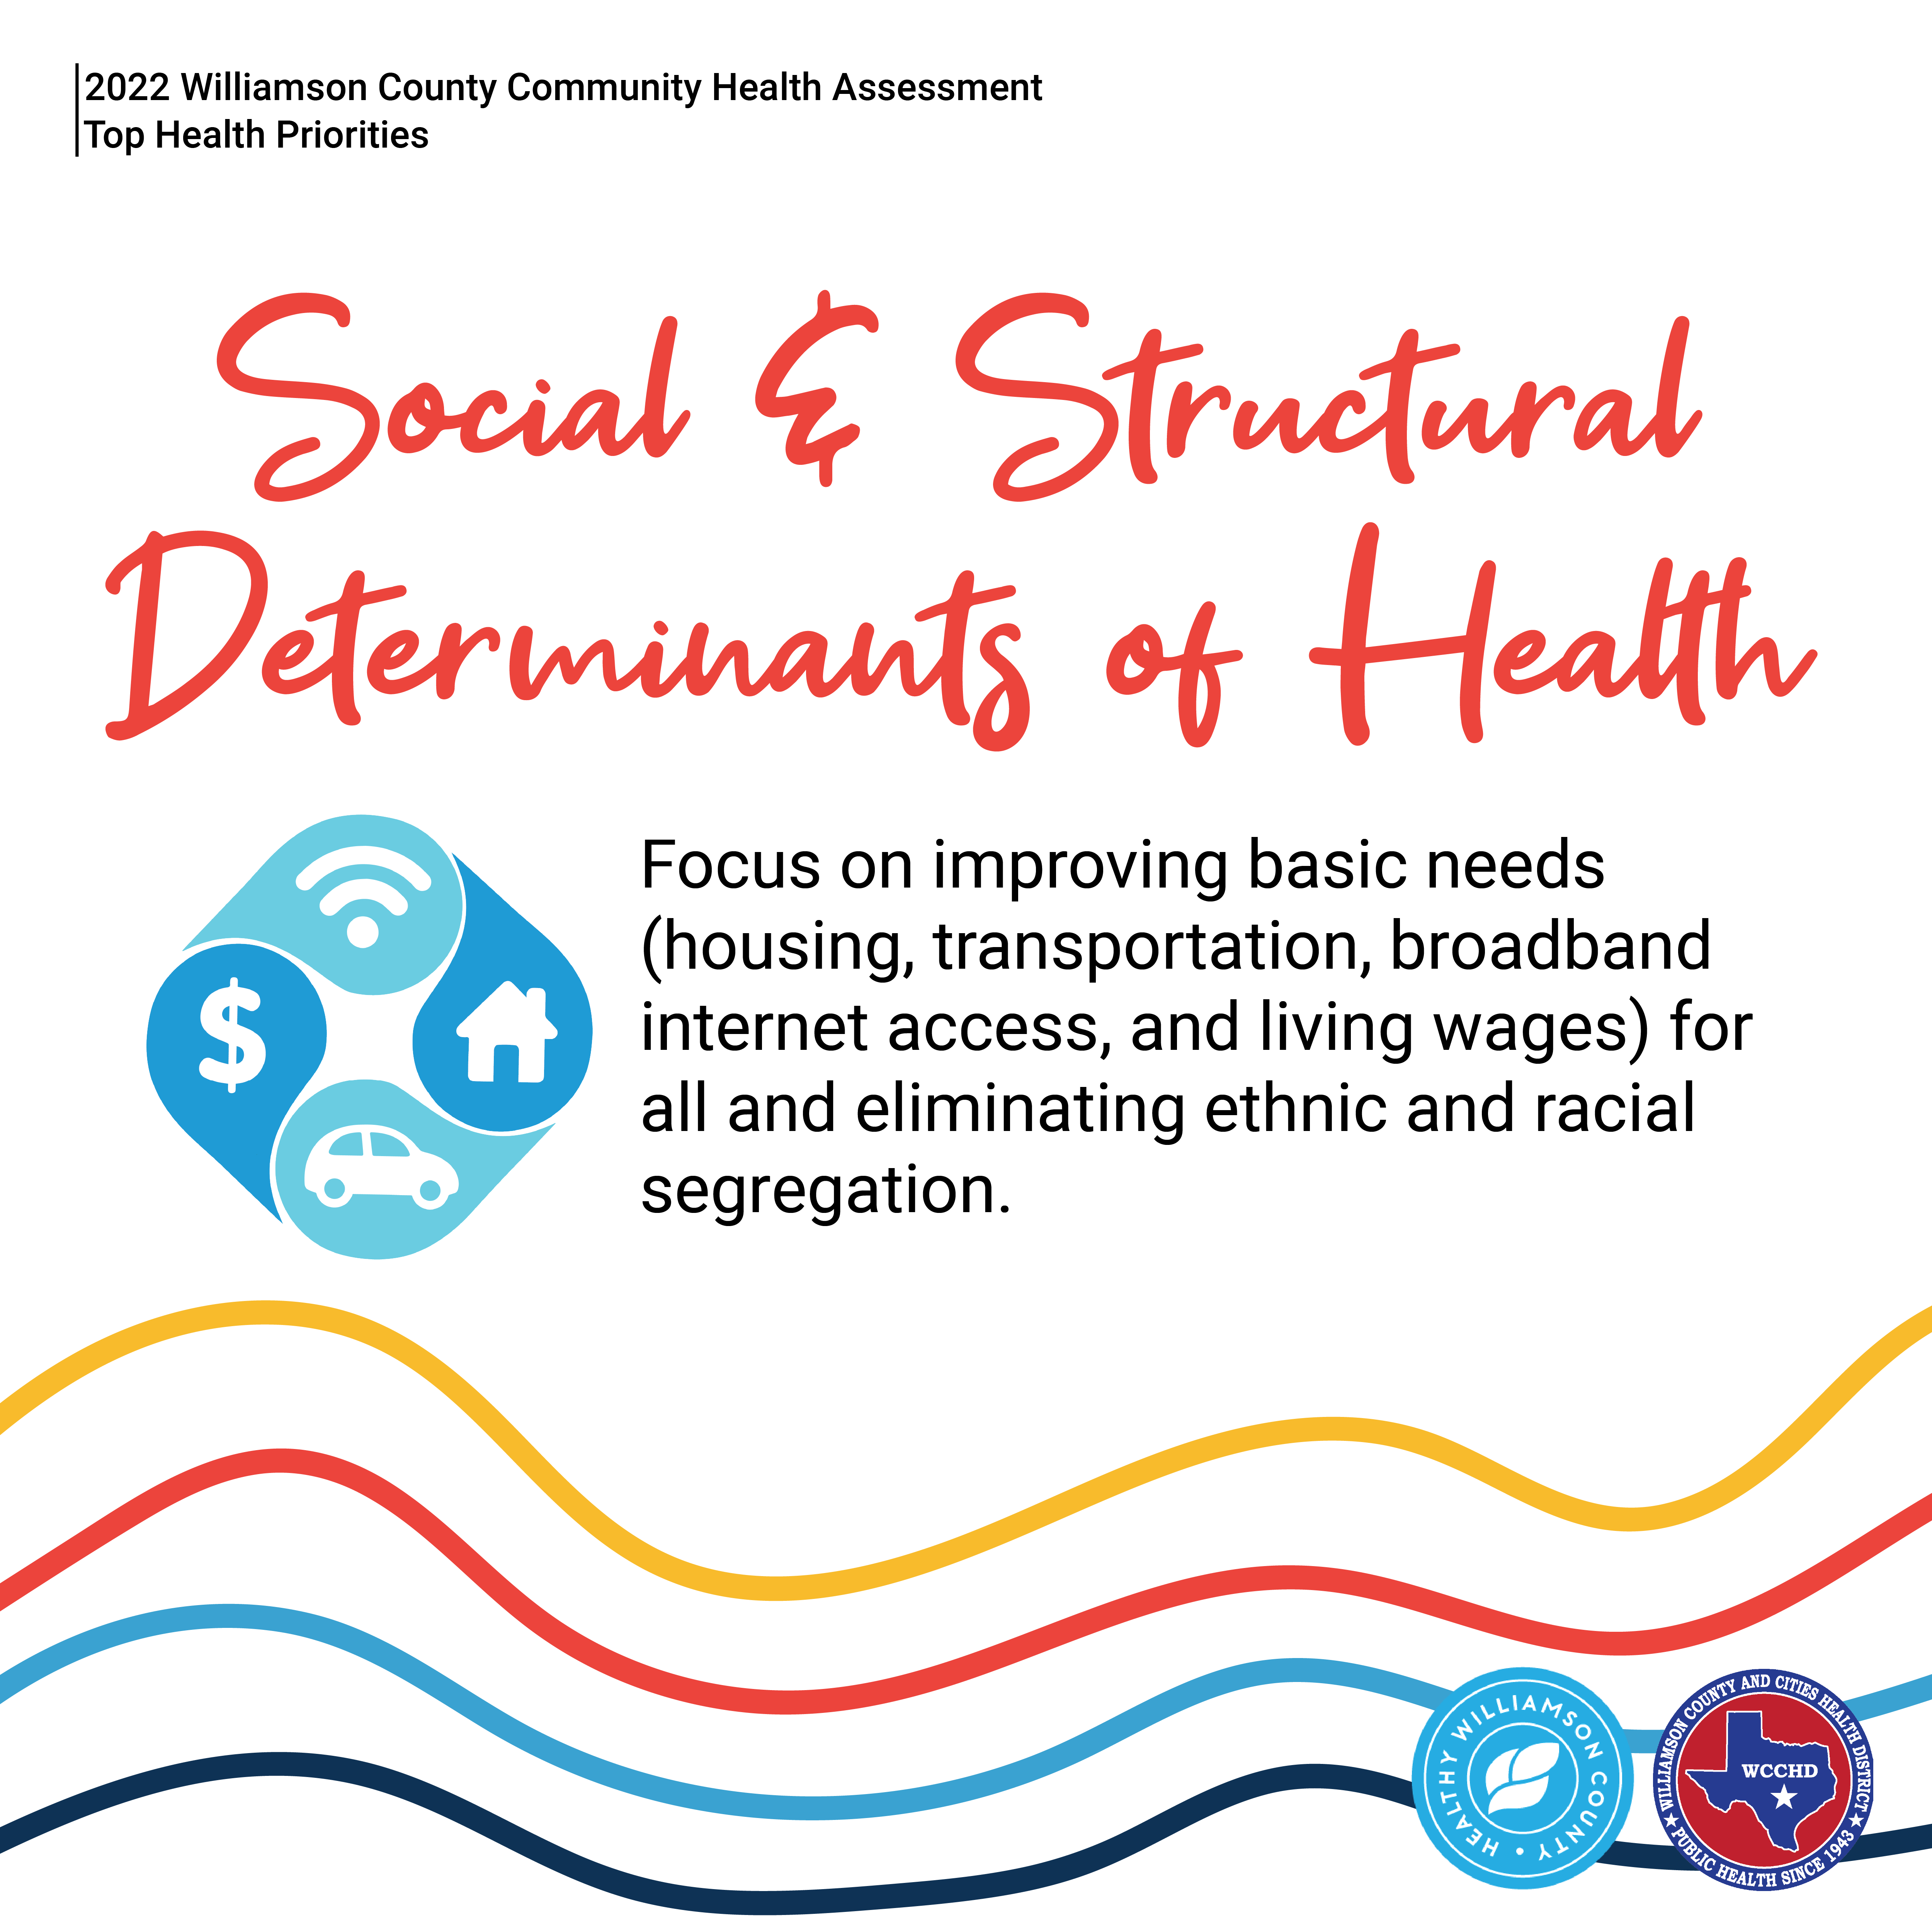 2022 Williamson County Community Health Assessment. Top Health Priorities. Social & Structural Determinants of Health. Below, an icon of the wifi symbol, a house, a car, and an American dollar sign. Text to the right: Focus on improving basic needs (housing, transportation, broadband internet access, and living wages) for all and eliminating ethnic and racial segregation.  Multicolored squiggly lines. Logos of Healthy Williamson County and Williamson County and Cities Health District.